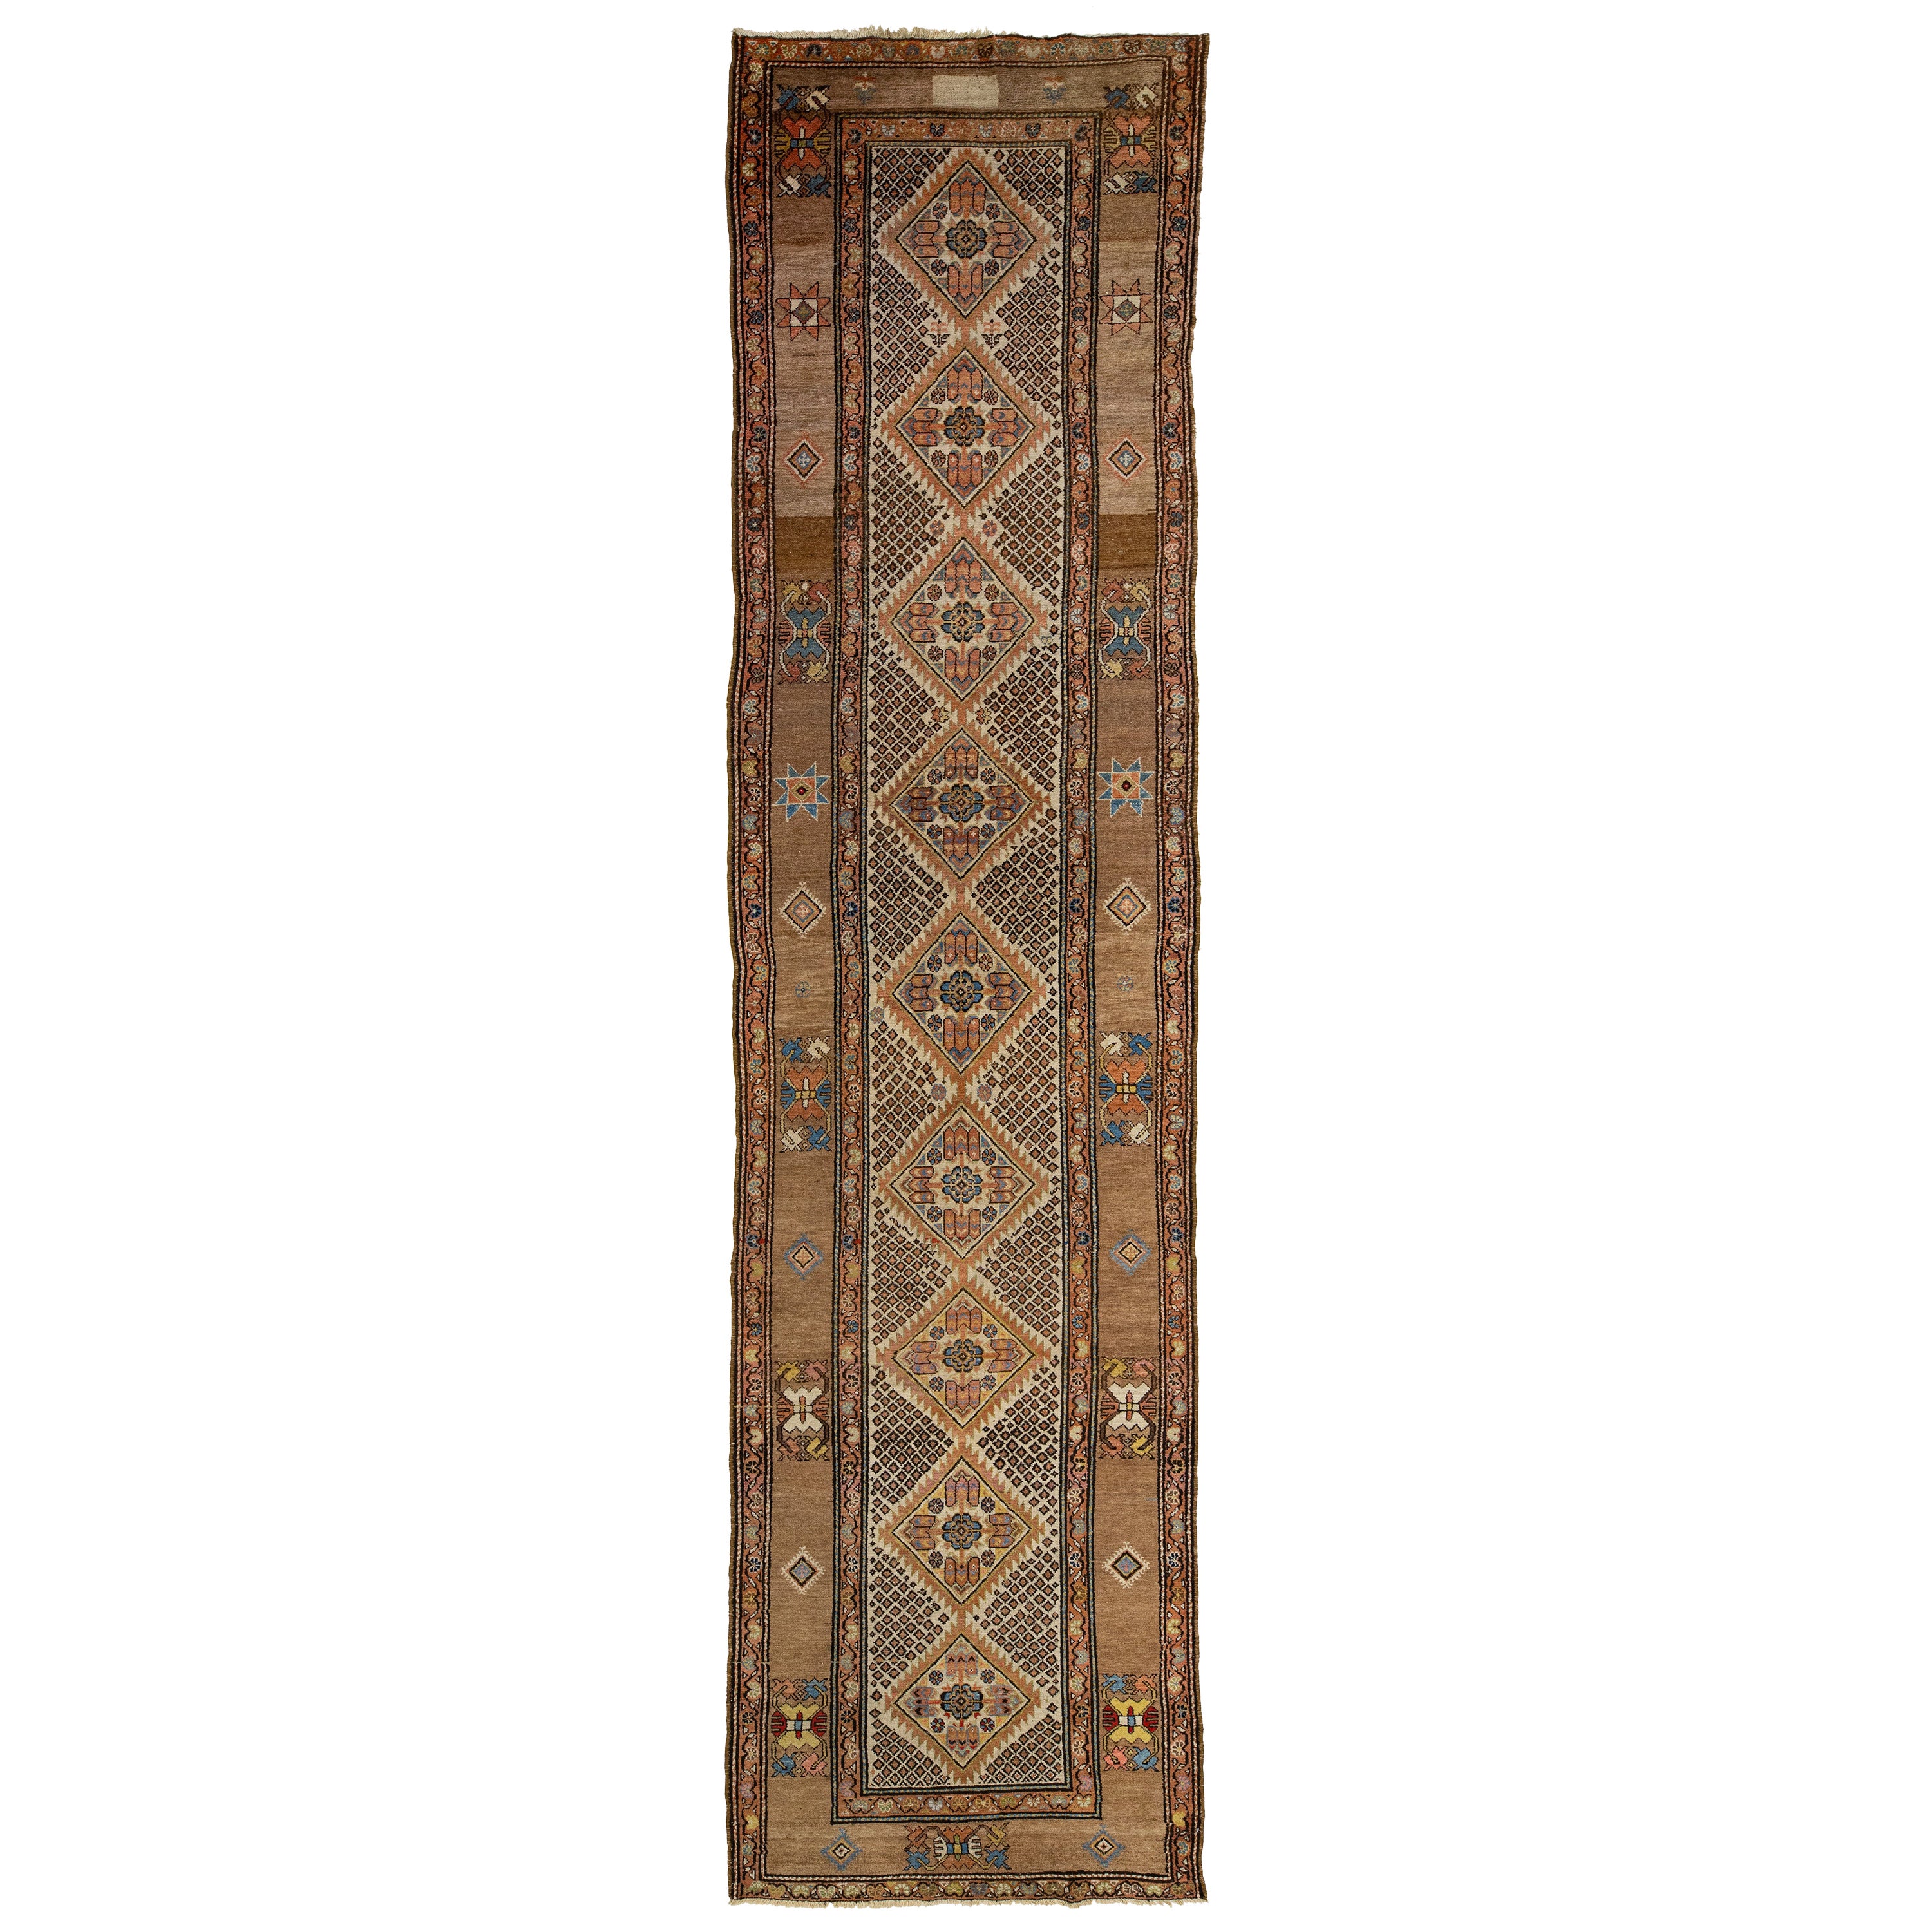 Tribal Designed Antique Wool Runner Persian Malayer From The 1900s In Beige